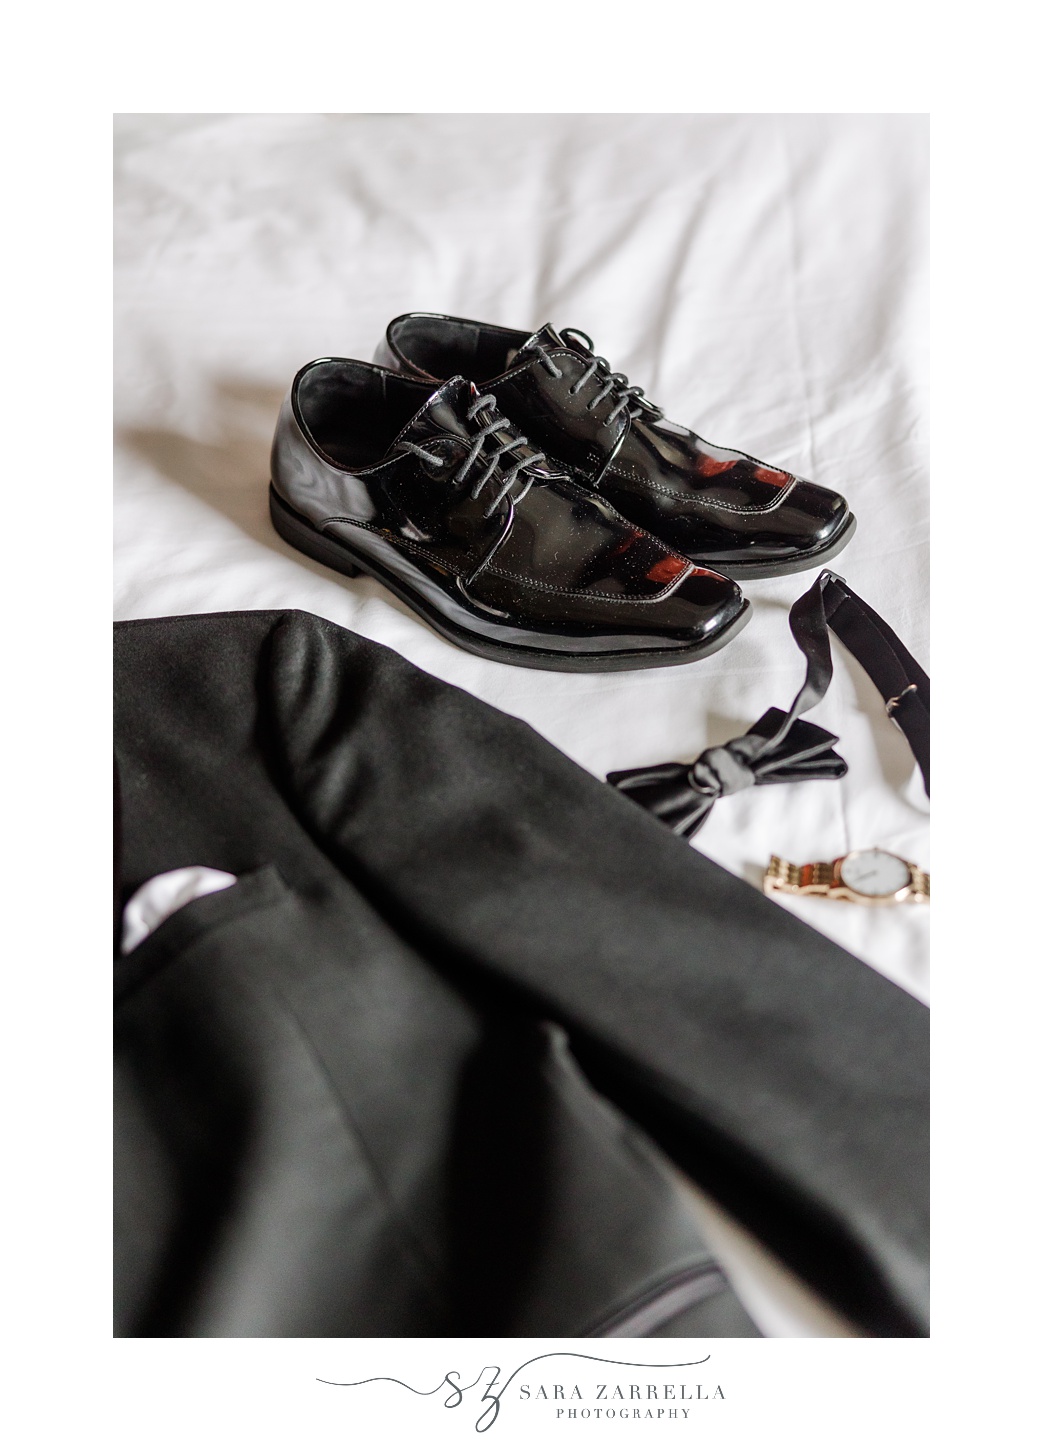 groom's black shoes and jacket lay on bed during prep for New Year's Eve wedding